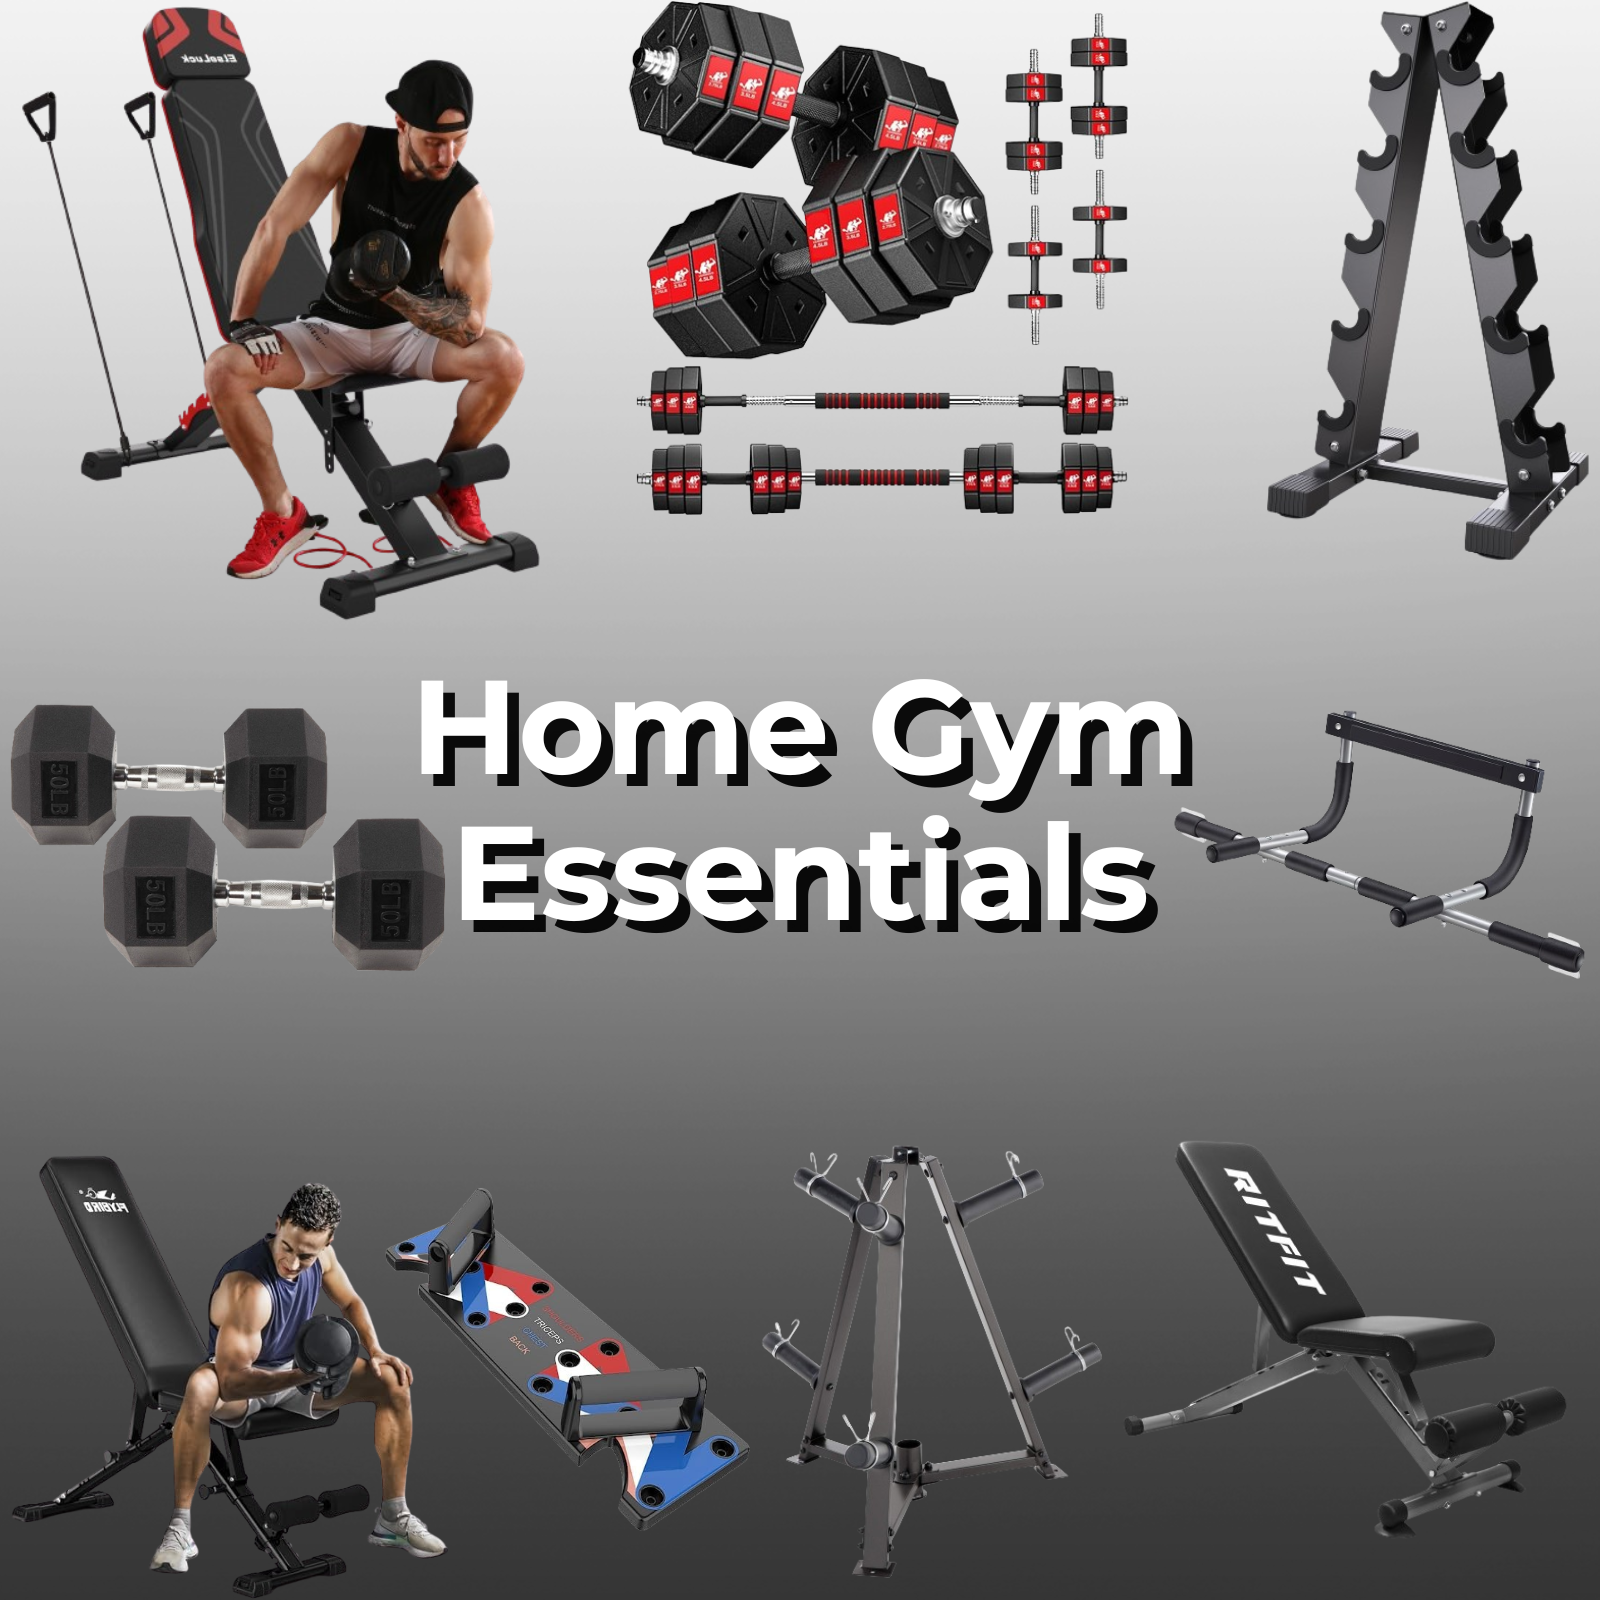 A variety of home gym equipment including adjustable benches, indoor rowing machines, and pedal exercisers.